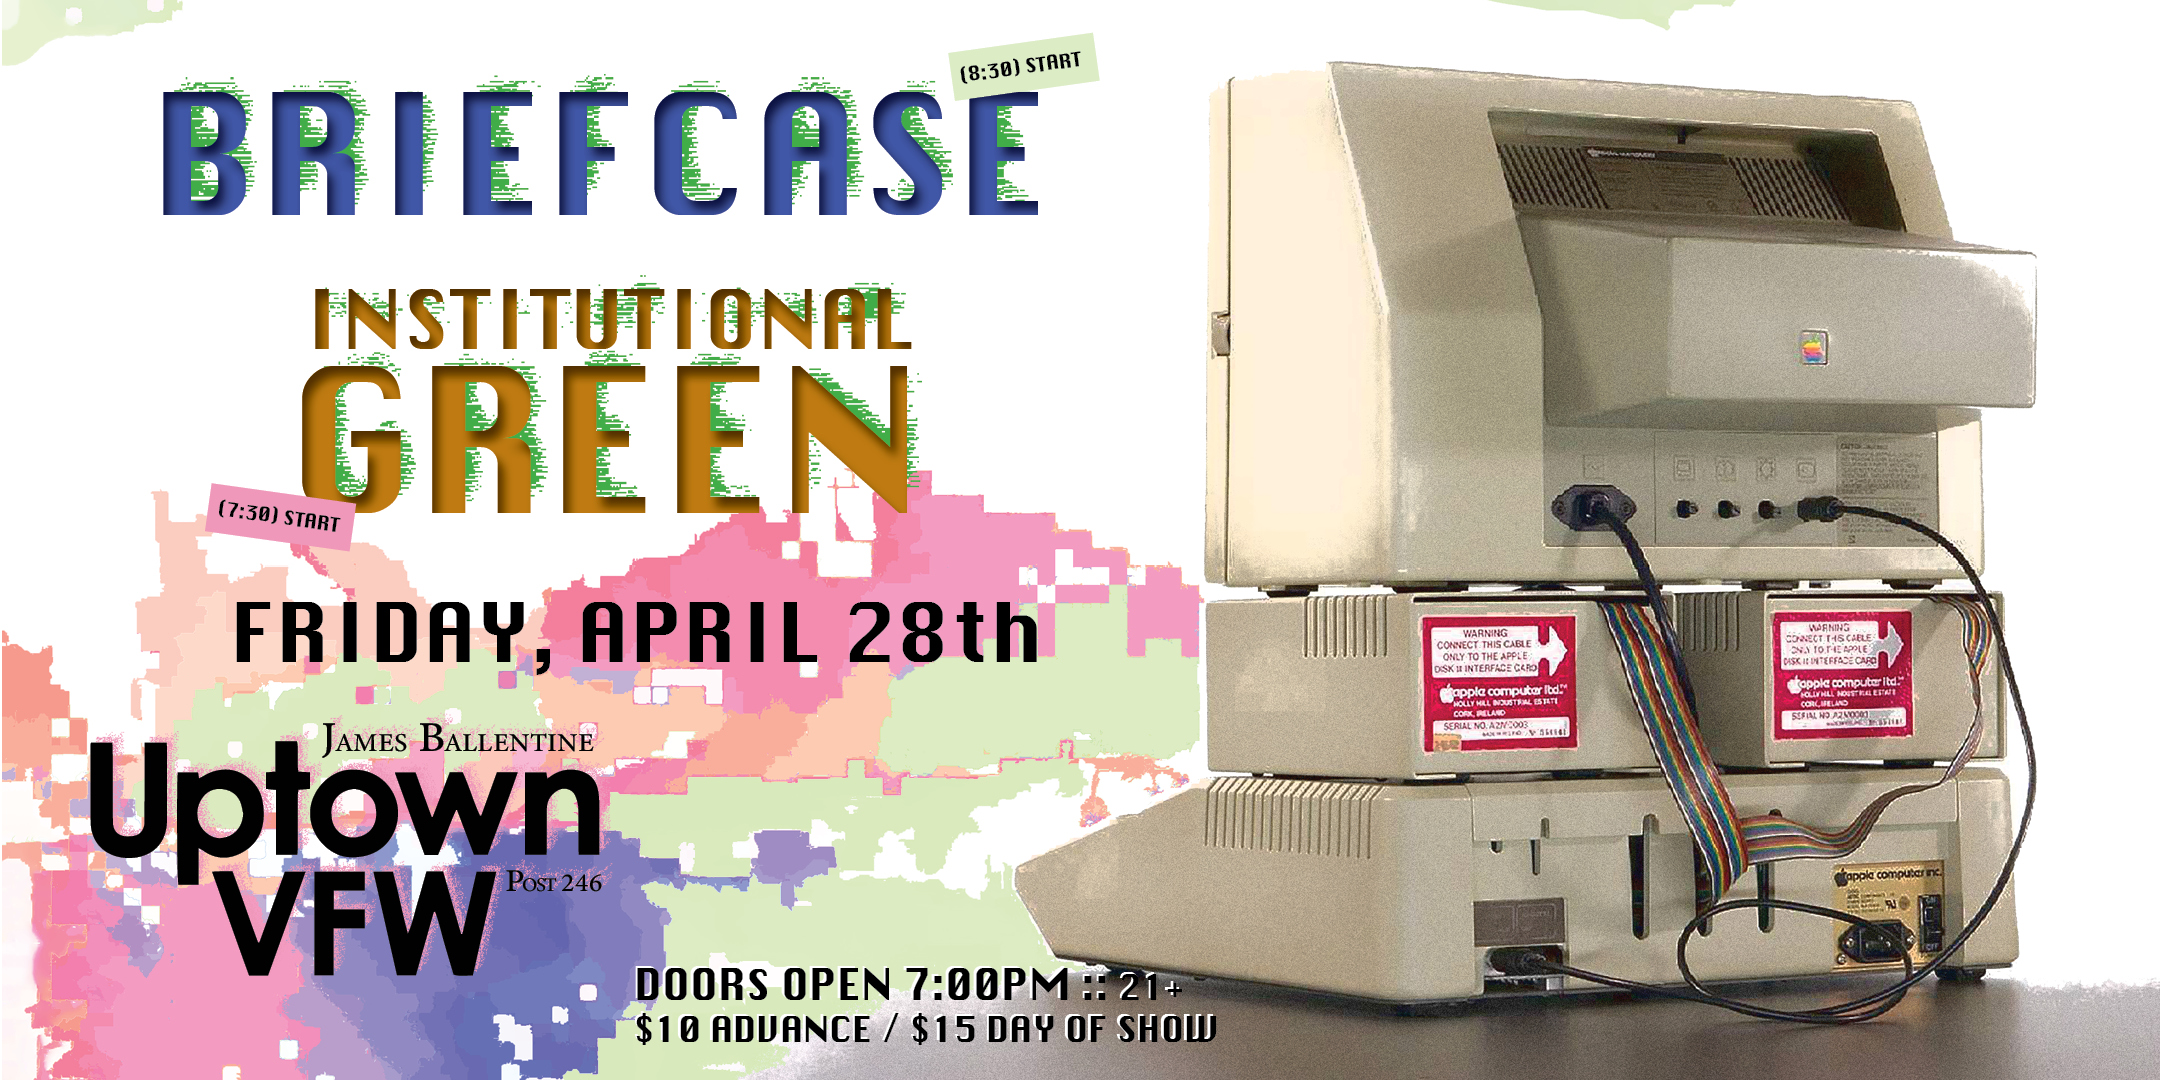 Briefcase Institutional Green Friday, April 28 James Ballentine "Uptown" VFW Post 246 Doors 7:00pm :: Music 7:30pm :: 21+ GA $10 ADV / $15 DOS NO REFUNDS